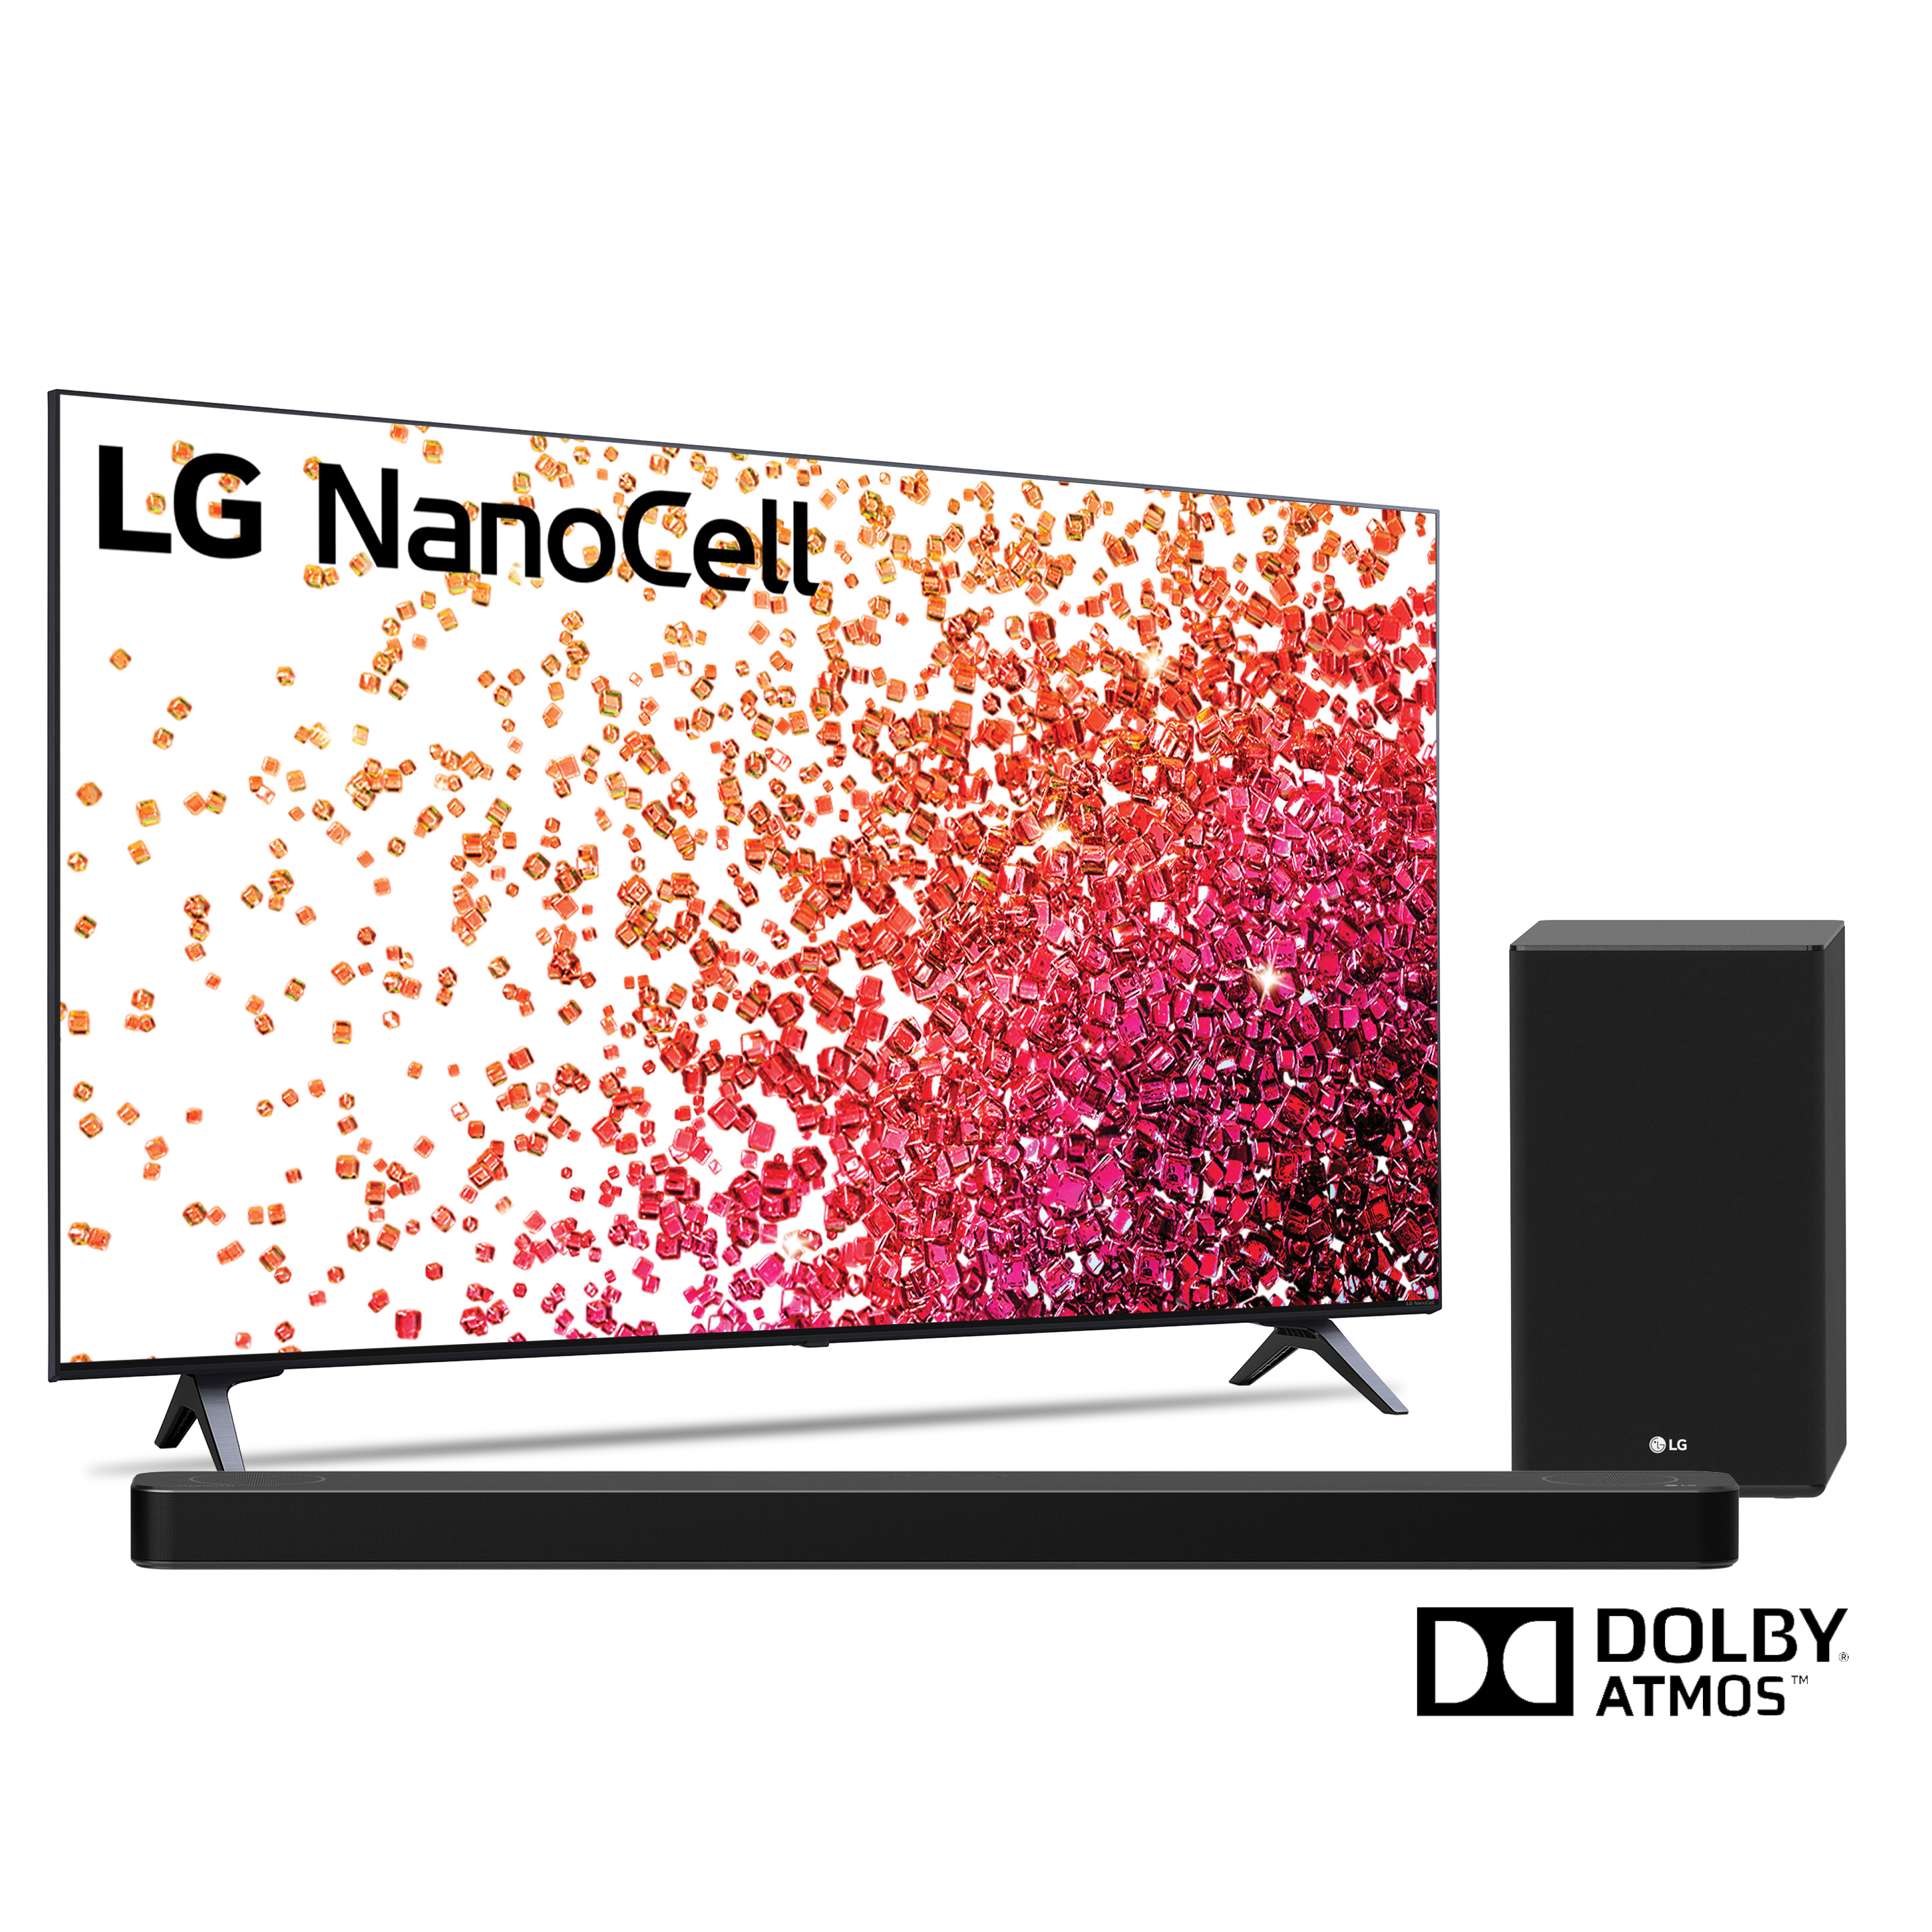 LG NanoCell 65" 4K UHD Smart TV and a LG 3.1.2 Channel Sound Bar System PLUS a Free $100 Furniture Gift Card